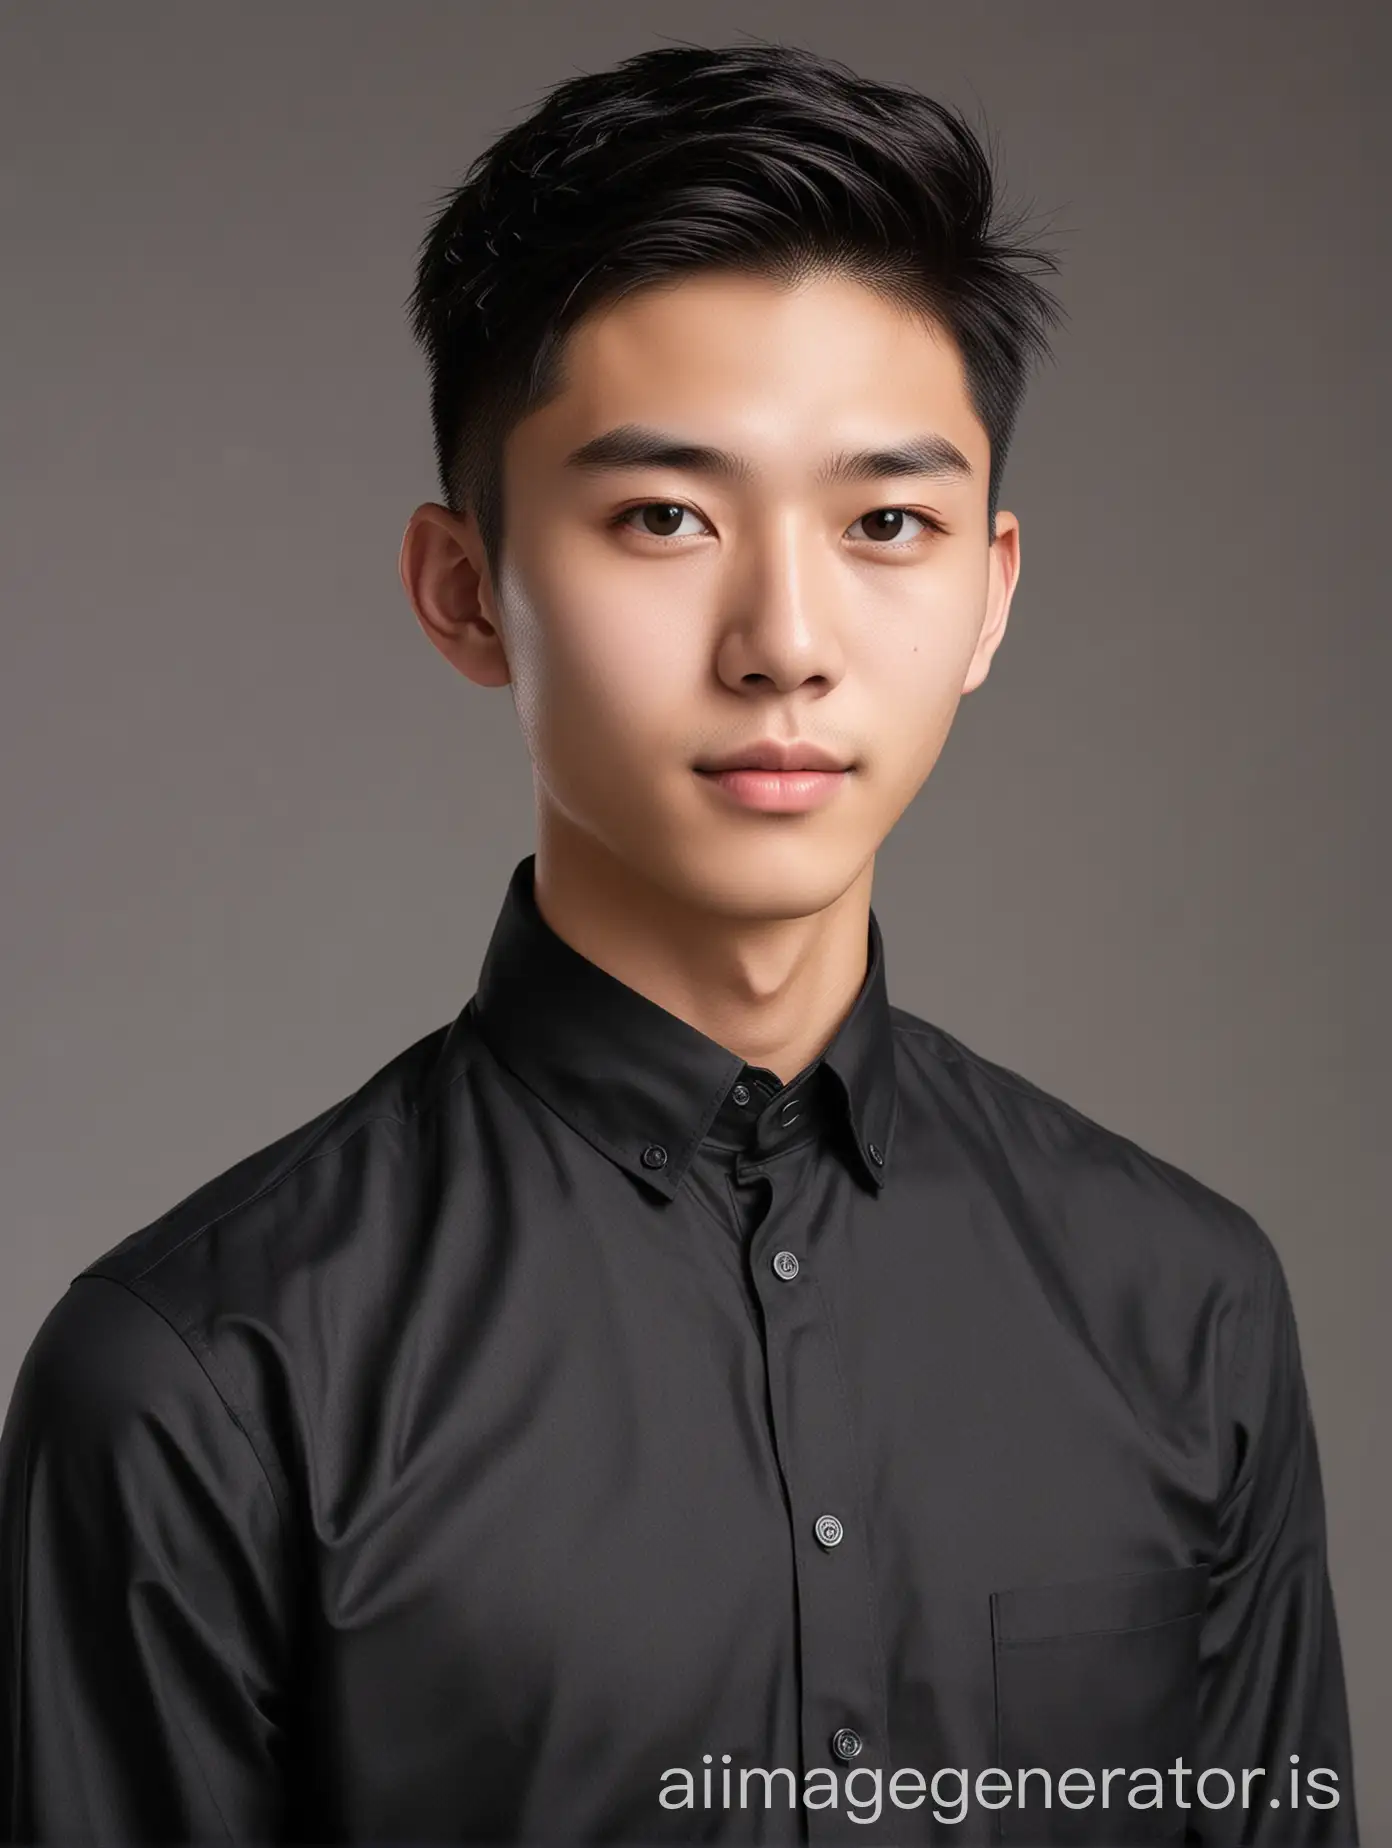 Chinese-Teen-Male-in-Formal-Attire-Poses-for-LinkedIn-Photo